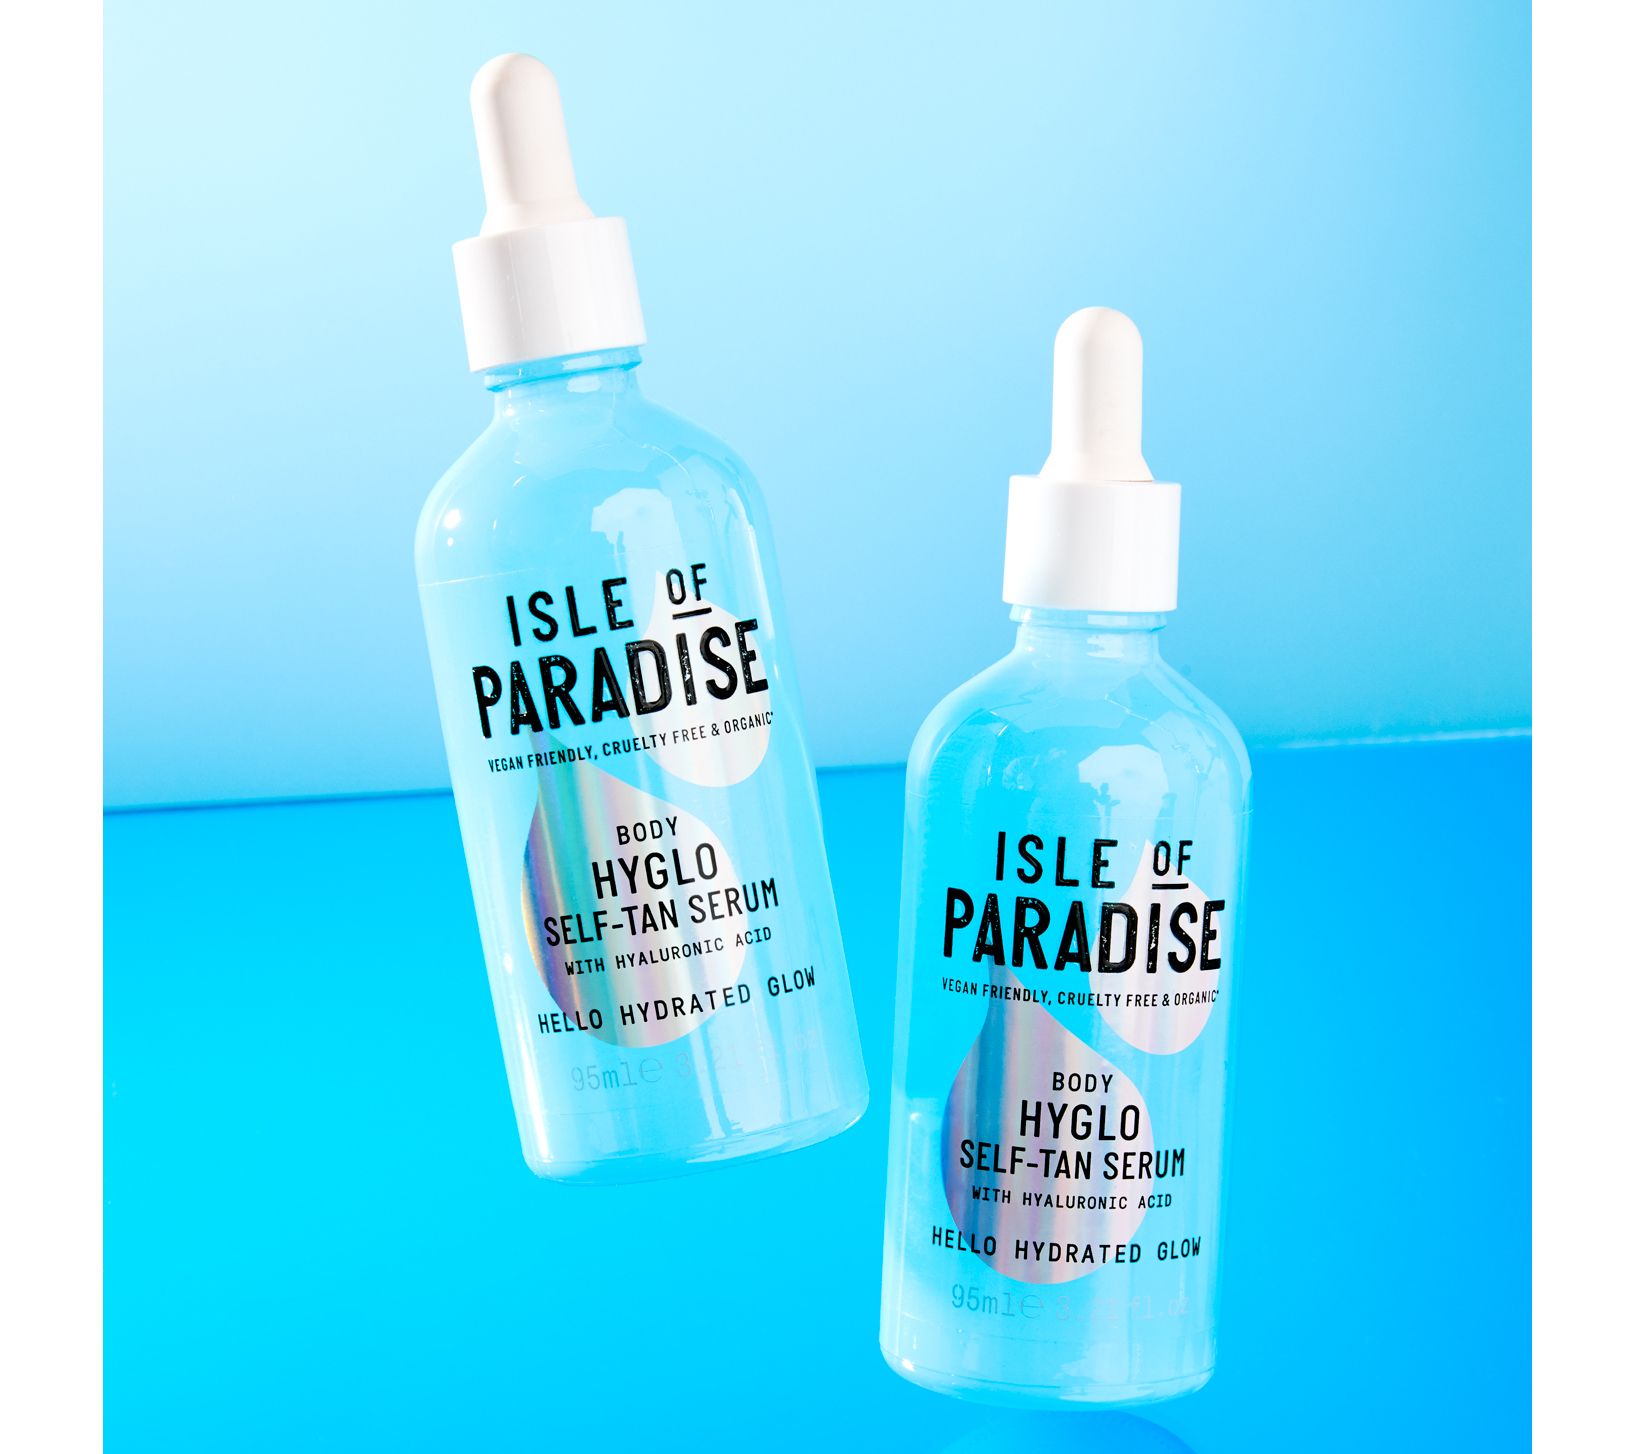 Isle of Paradise Is Now Selling Body Care